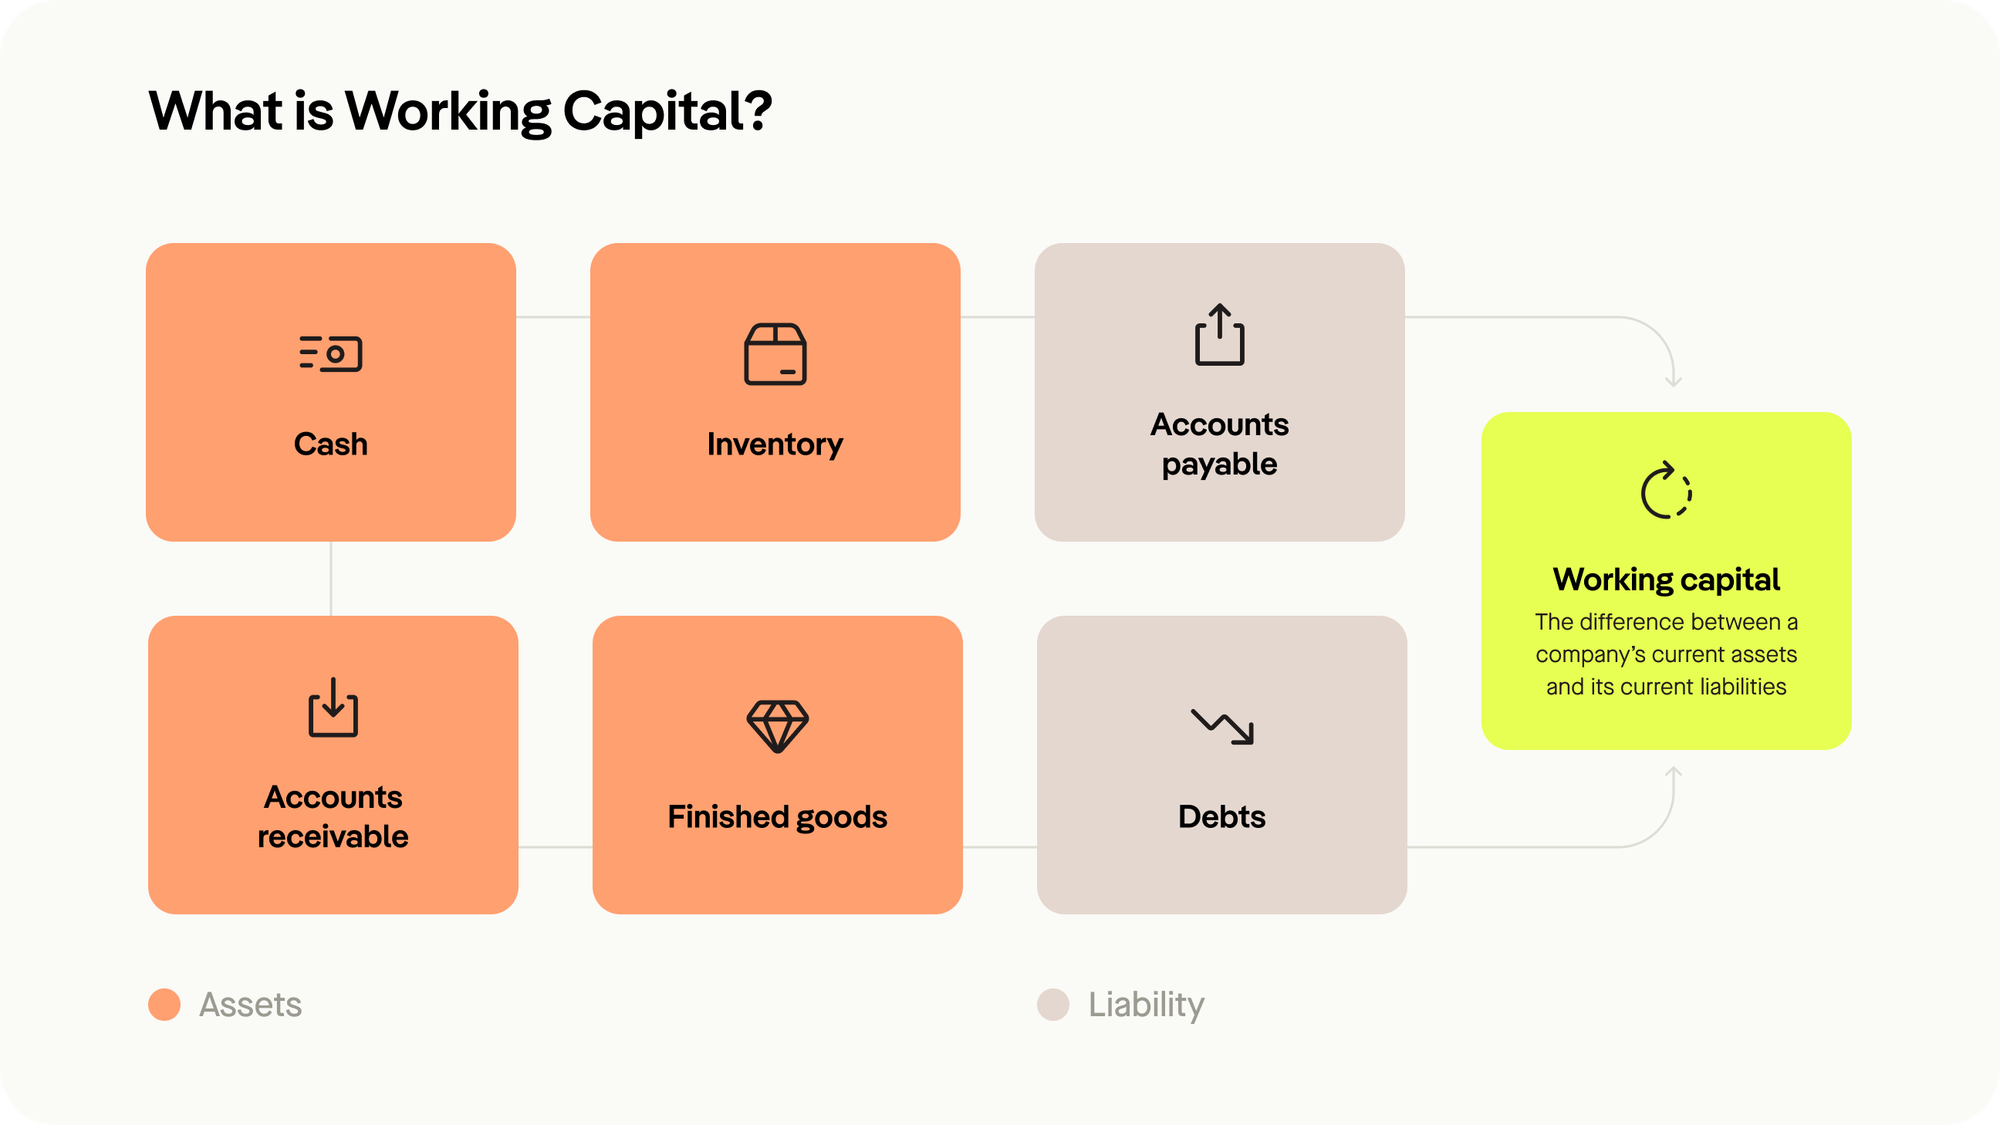 What is working capital?